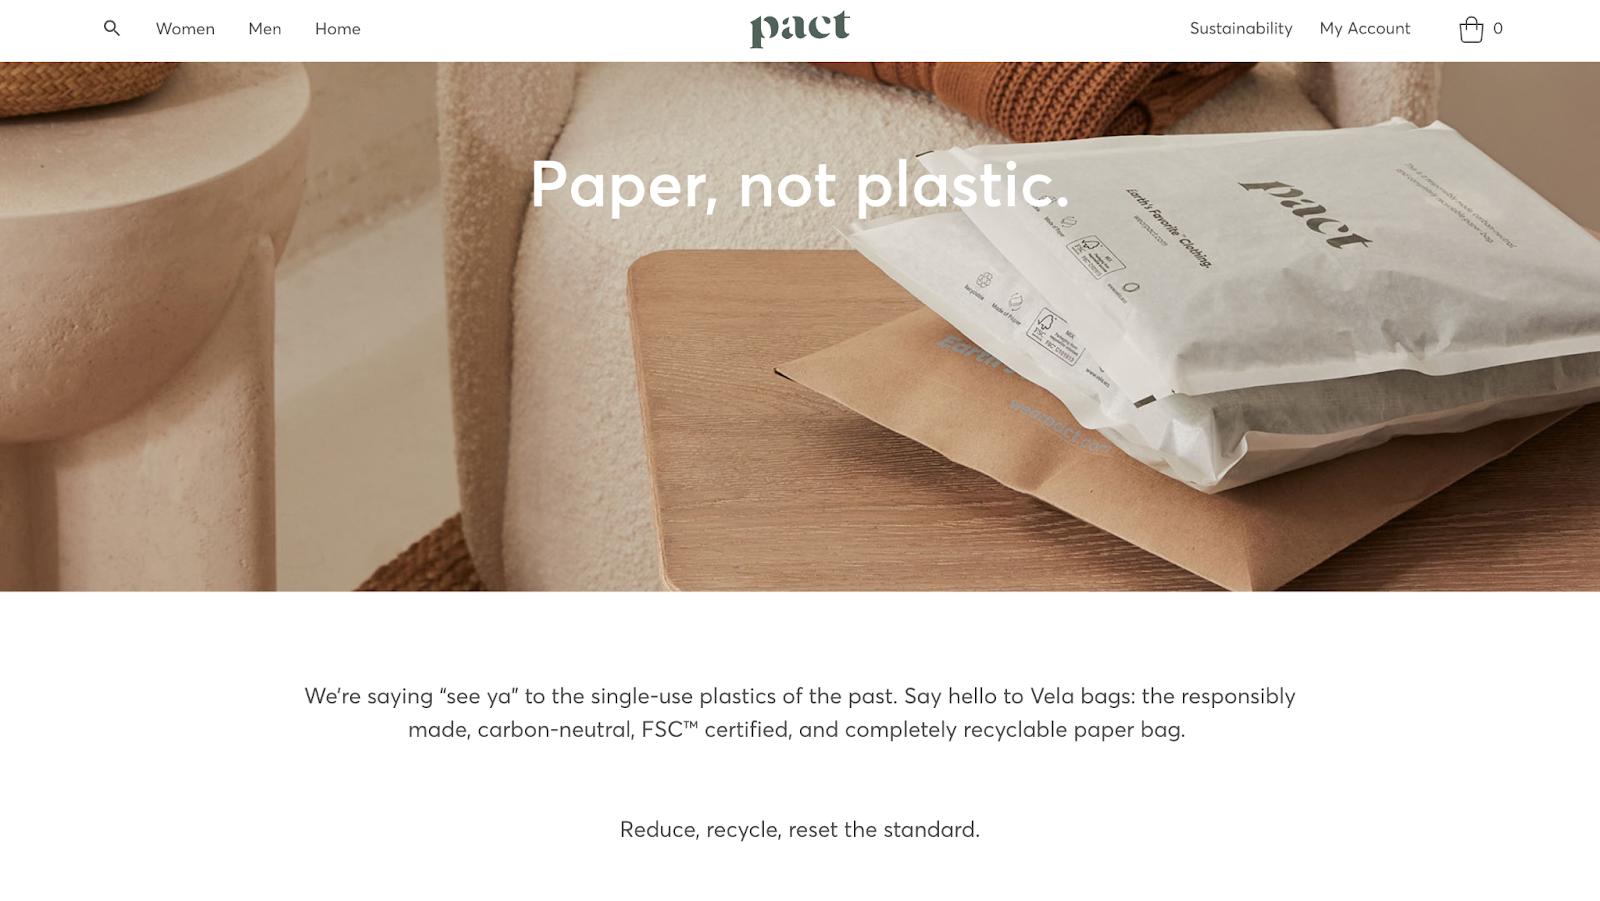 ecommerce trend on brand's ethics page showing they use paper not plastic packaging